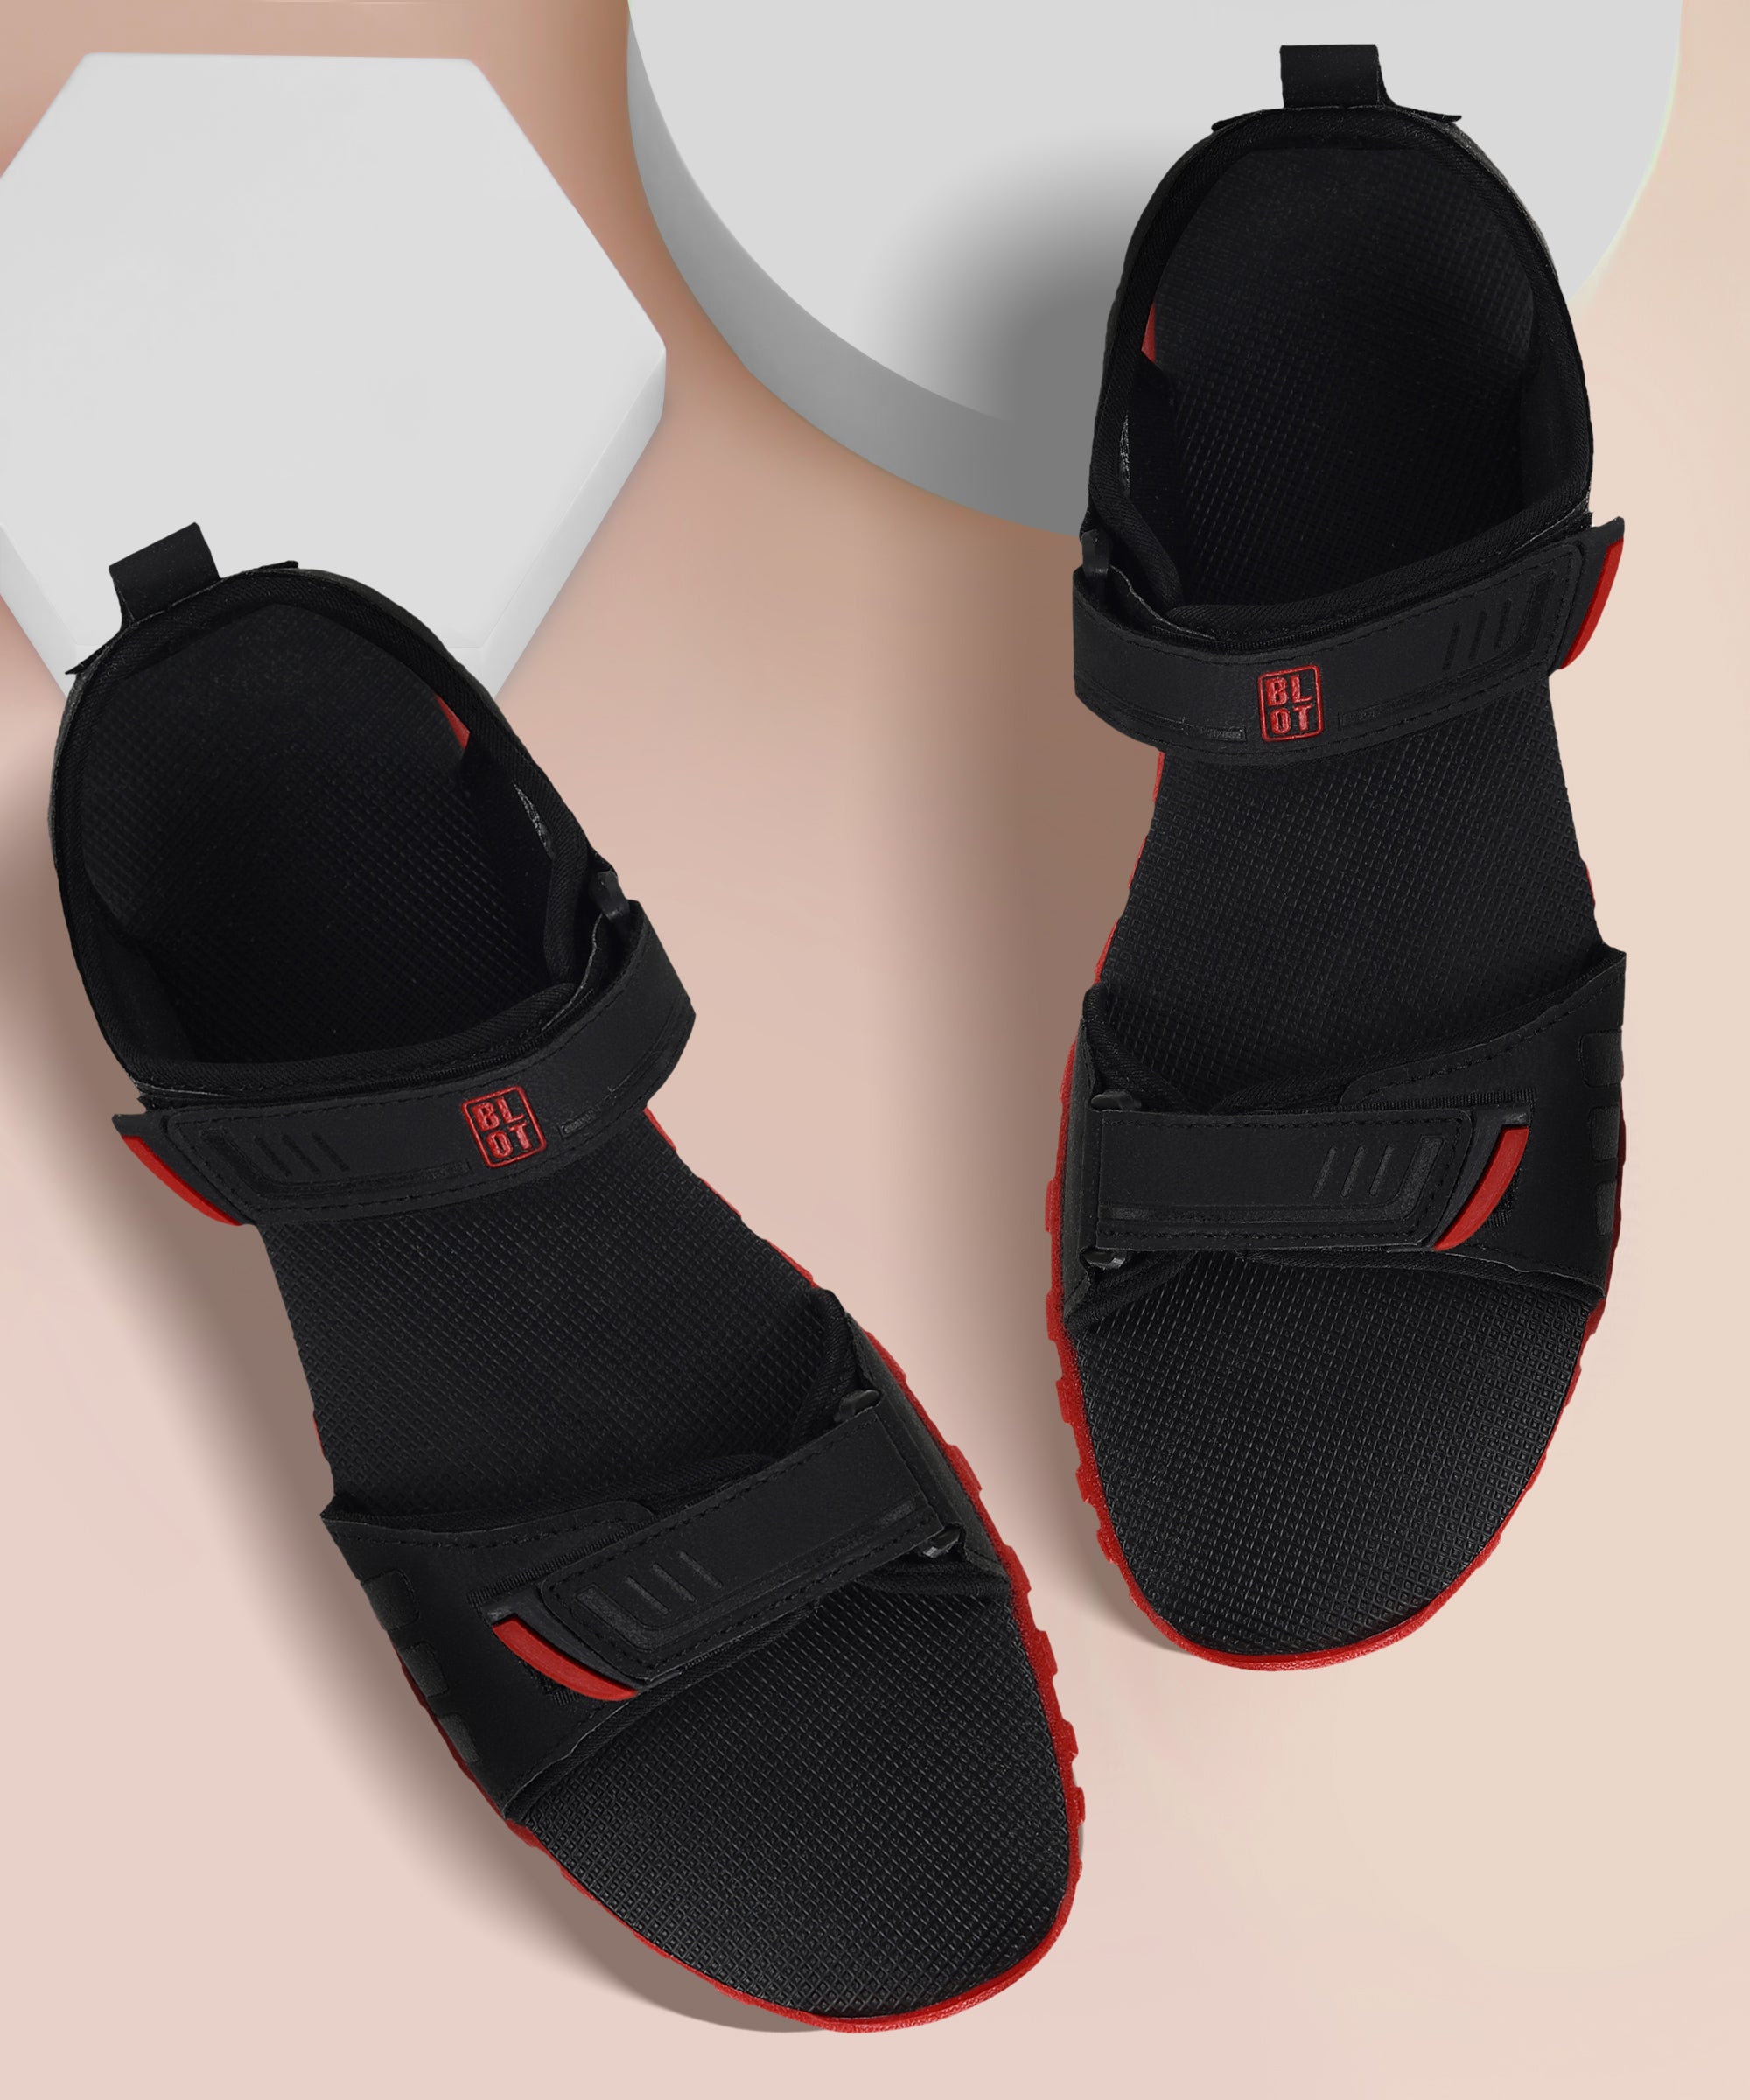 Paragon Blot K1420G Men Stylish Sandals | Comfortable Sandals for Daily Outdoor Use | Casual Formal Sandals with Cushioned Soles